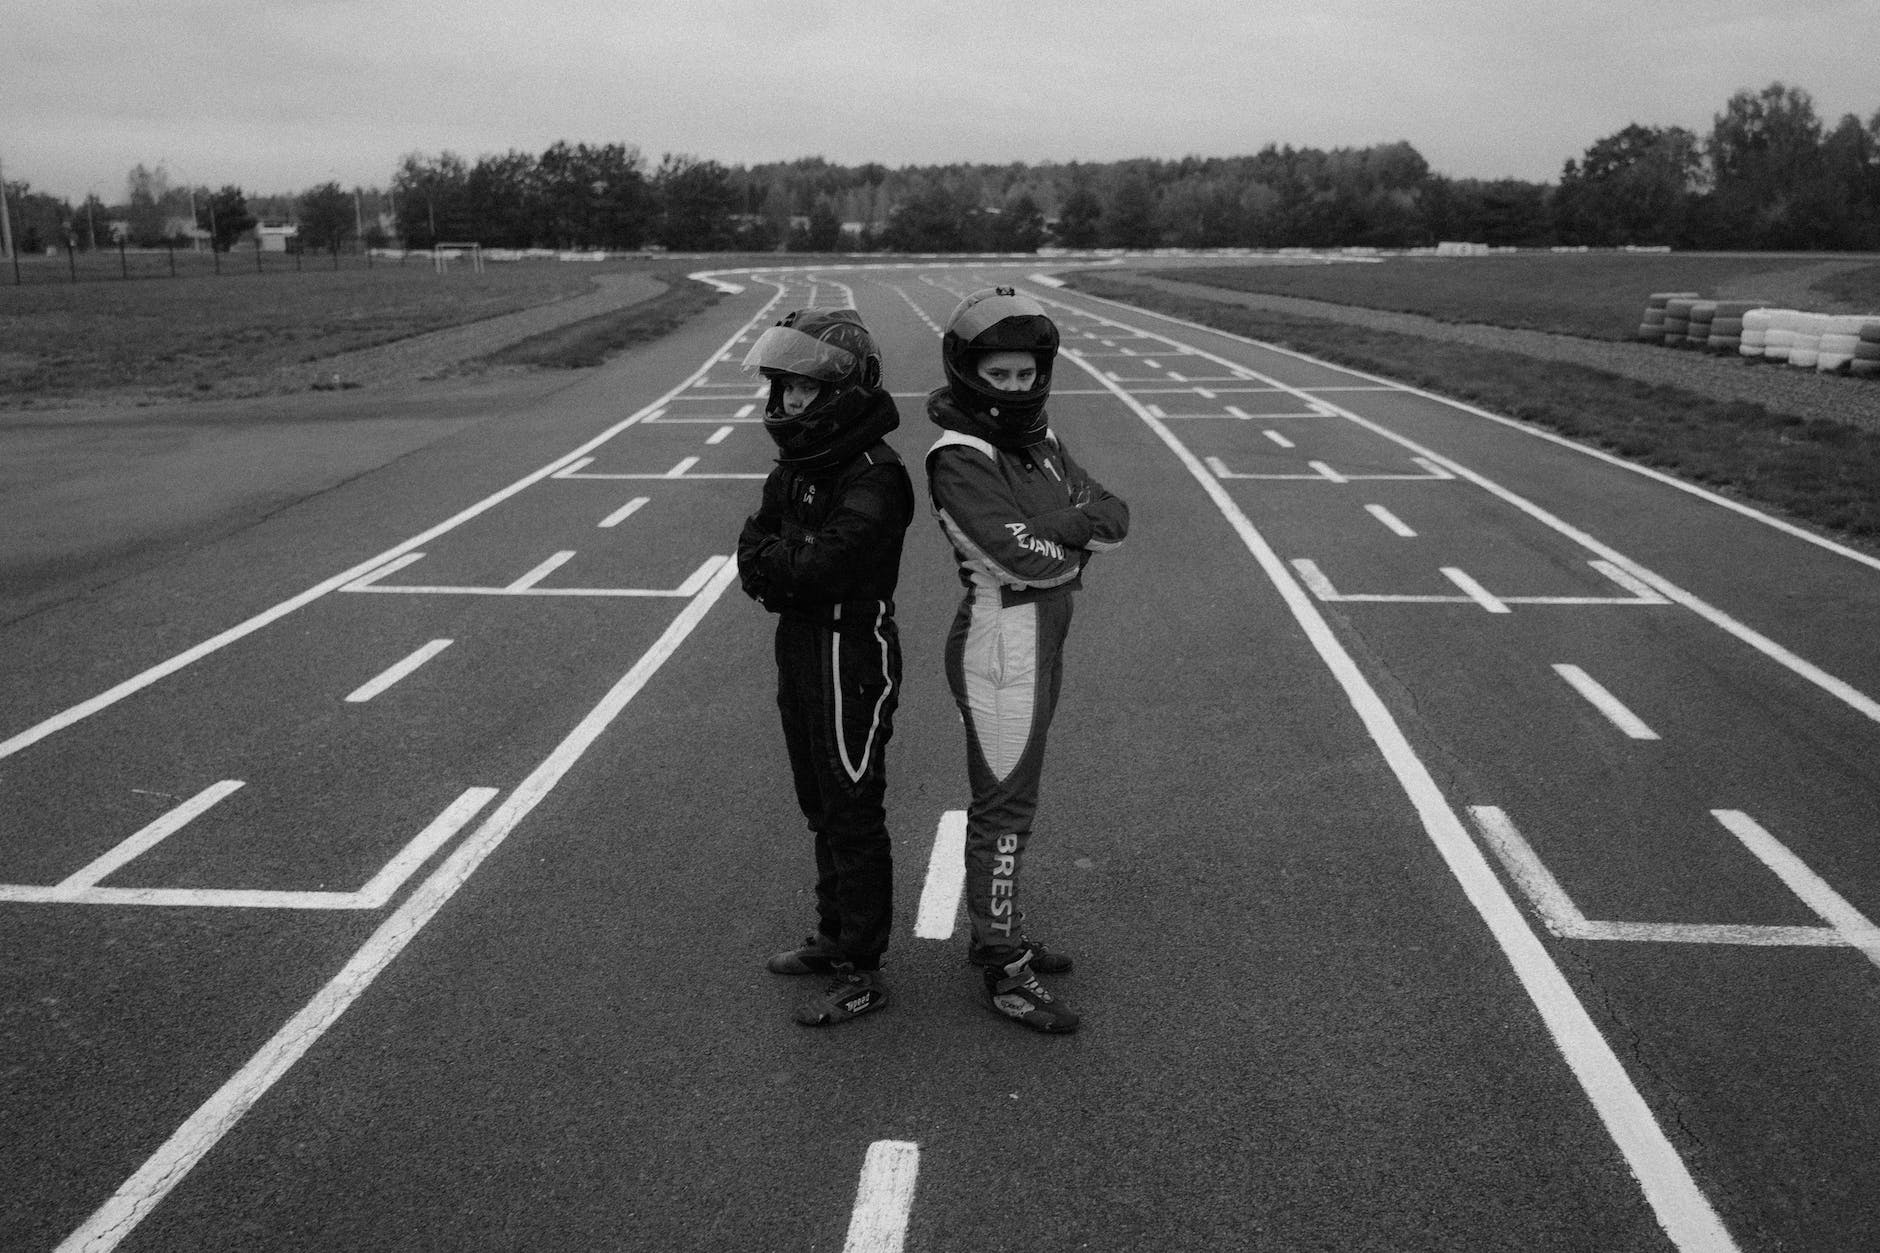 monochrome photo of two athletes in racing suit standing in racetrack